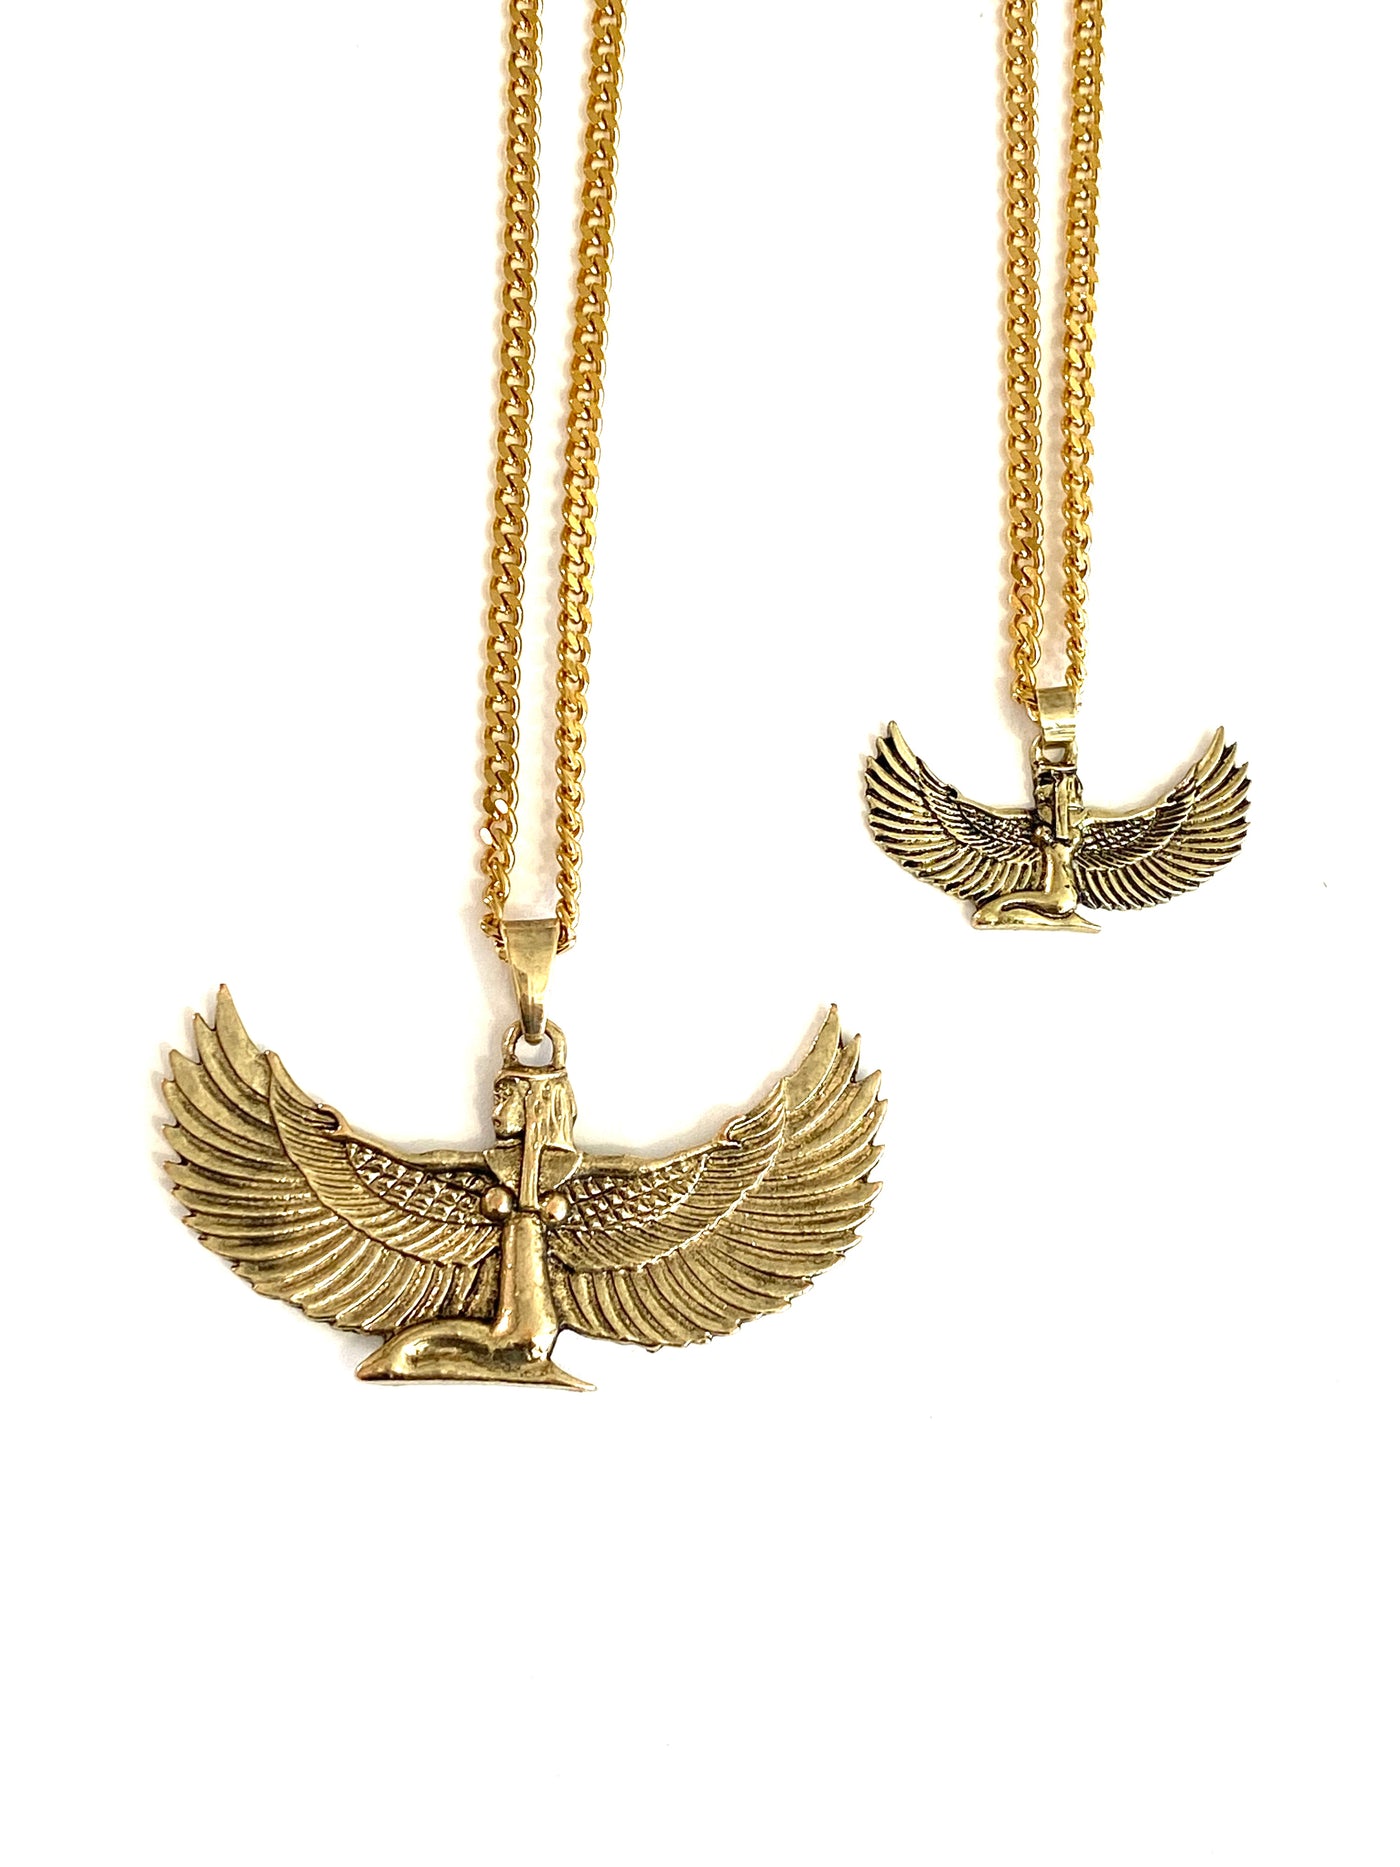 Goddess Isis Charm Necklace